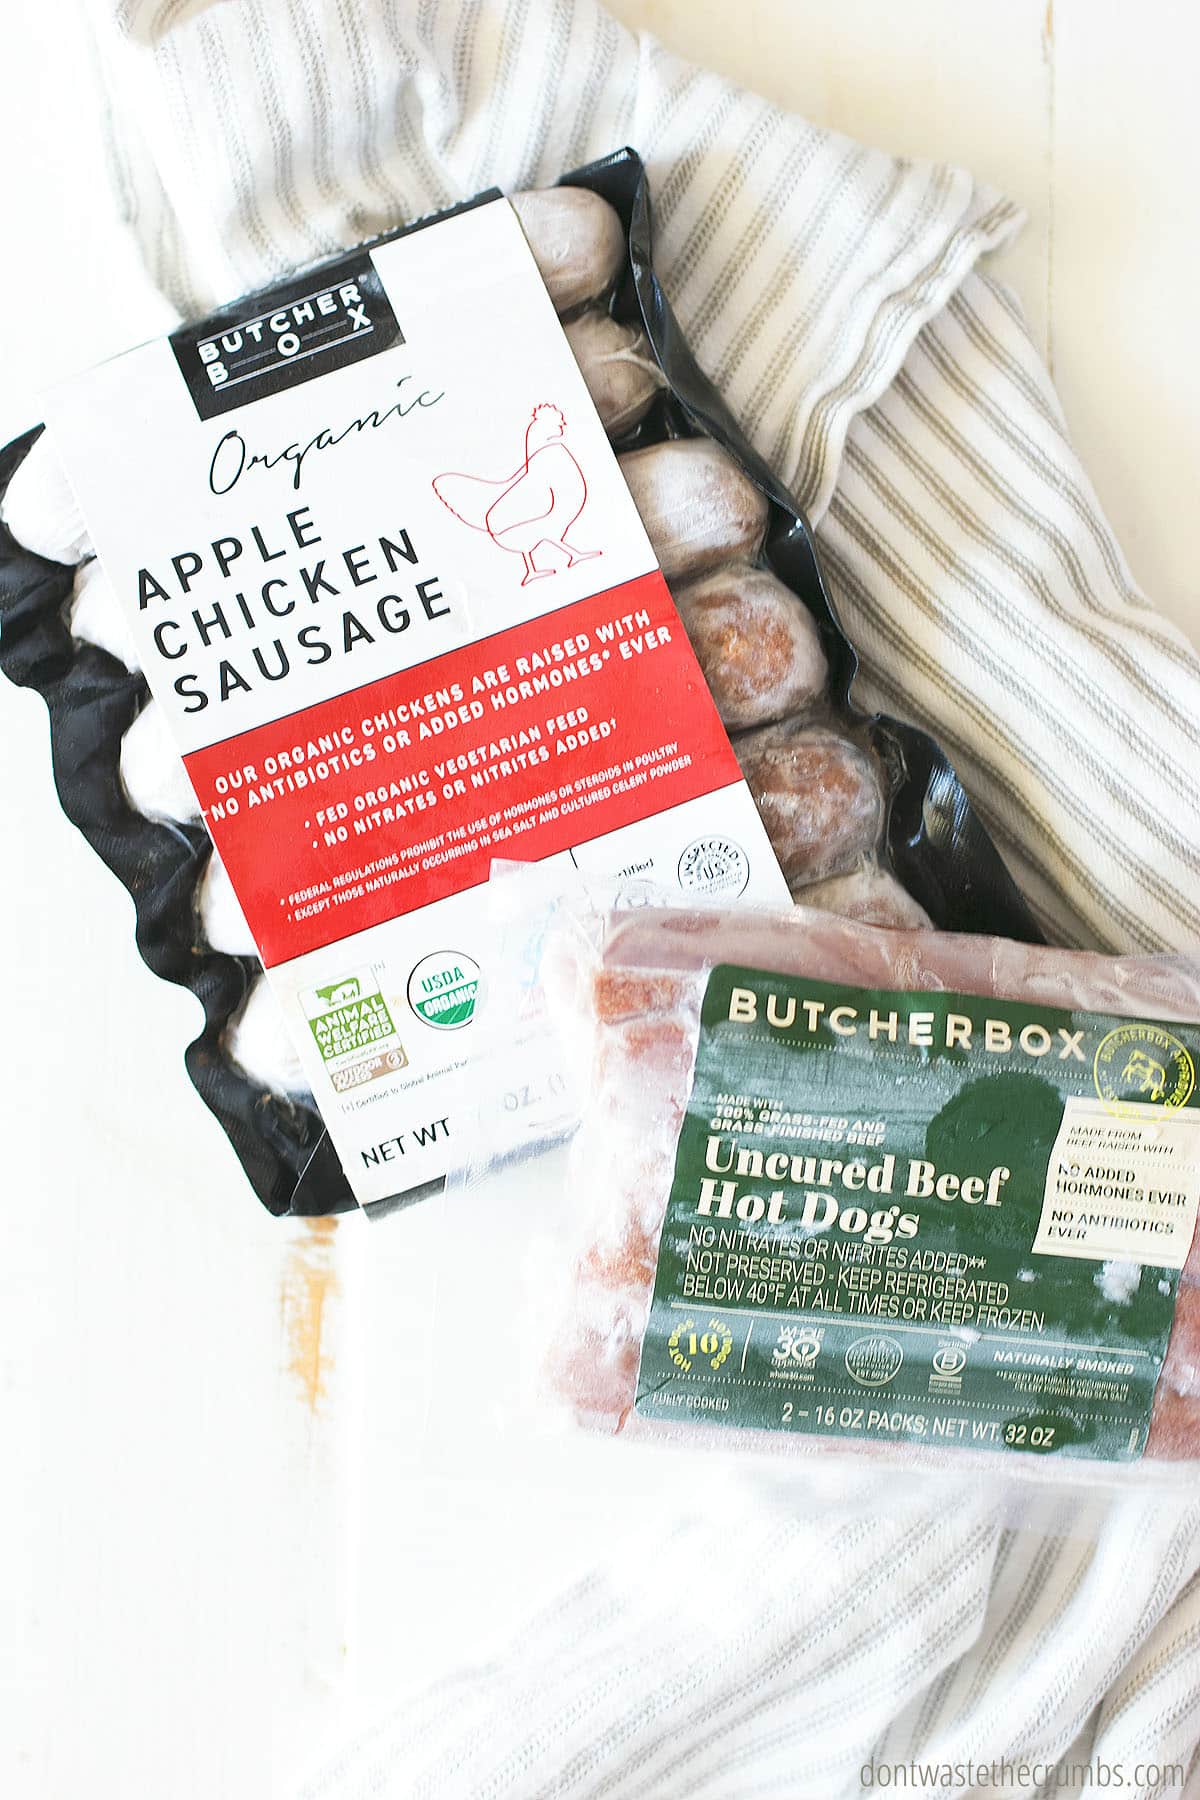 Packaged organic apple chicken sausage and uncured beef hot dogs from ButcherBox